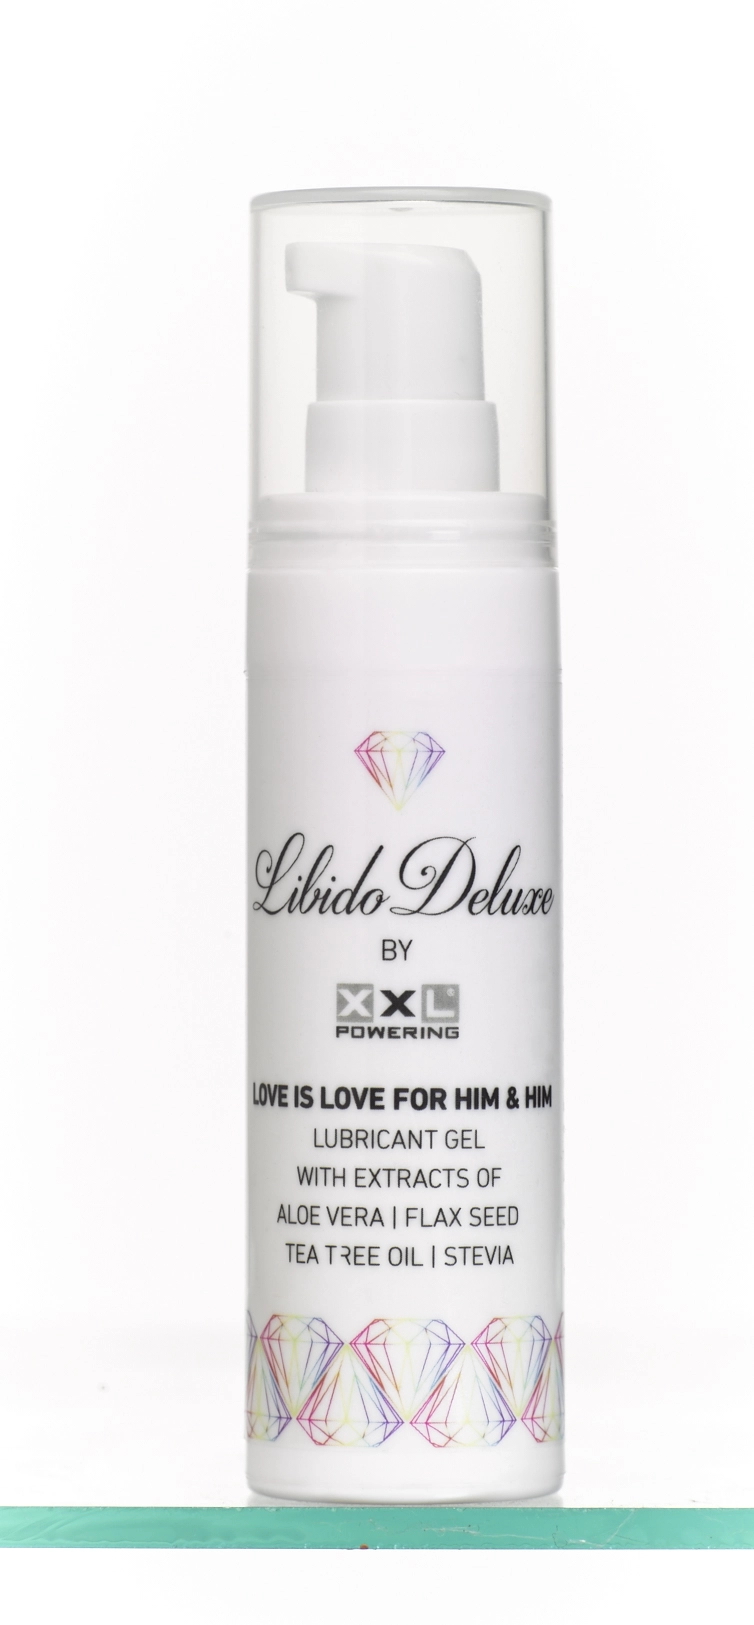 LIBIDO DELUXE - LOVE IS LOVE FOR HIM & HIM- 30 ML